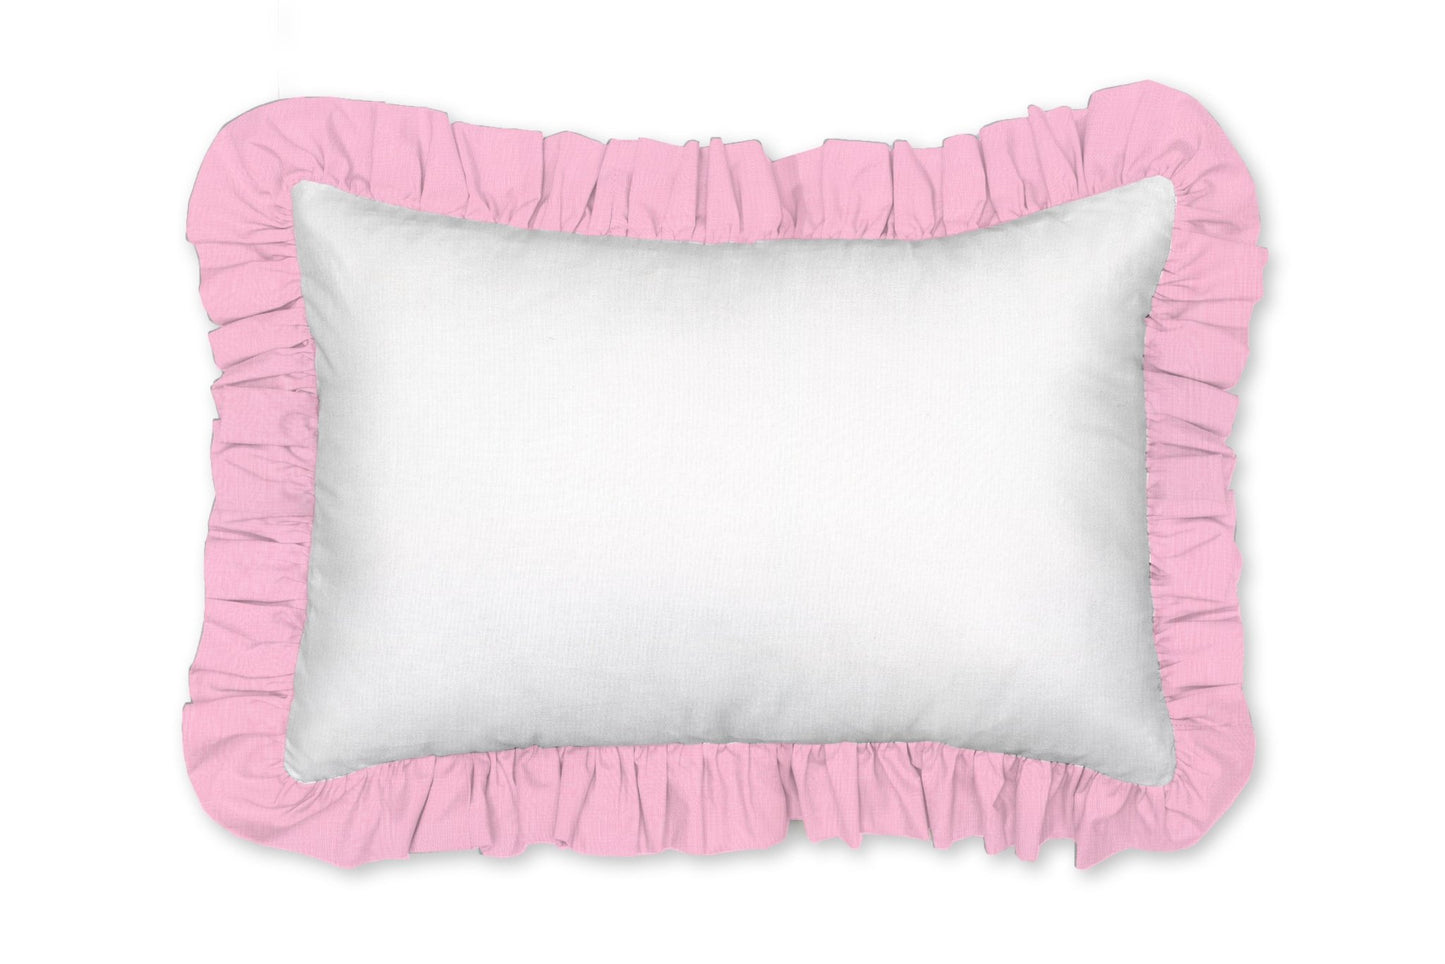 Pink and White Decorative Pillow - New Arrivals Inc